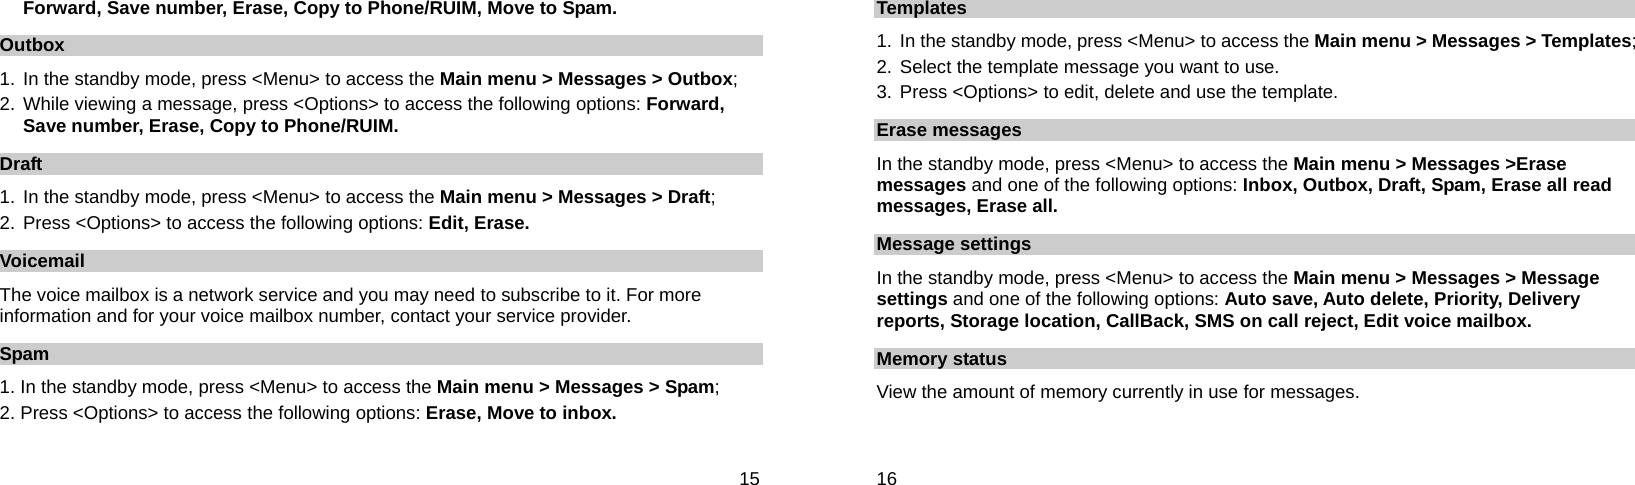  15 Forward, Save number, Erase, Copy to Phone/RUIM, Move to Spam. Outbox 1. In the standby mode, press &lt;Menu&gt; to access the Main menu &gt; Messages &gt; Outbox; 2. While viewing a message, press &lt;Options&gt; to access the following options: Forward, Save number, Erase, Copy to Phone/RUIM. Draft 1. In the standby mode, press &lt;Menu&gt; to access the Main menu &gt; Messages &gt; Draft; 2. Press &lt;Options&gt; to access the following options: Edit, Erase. Voicemail The voice mailbox is a network service and you may need to subscribe to it. For more information and for your voice mailbox number, contact your service provider.   Spam 1. In the standby mode, press &lt;Menu&gt; to access the Main menu &gt; Messages &gt; Spam; 2. Press &lt;Options&gt; to access the following options: Erase, Move to inbox.  16 Templates 1.  In the standby mode, press &lt;Menu&gt; to access the Main menu &gt; Messages &gt; Templates; 2.  Select the template message you want to use. 3. Press &lt;Options&gt; to edit, delete and use the template. Erase messages In the standby mode, press &lt;Menu&gt; to access the Main menu &gt; Messages &gt;Erase messages and one of the following options: Inbox, Outbox, Draft, Spam, Erase all read messages, Erase all. Message settings In the standby mode, press &lt;Menu&gt; to access the Main menu &gt; Messages &gt; Message settings and one of the following options: Auto save, Auto delete, Priority, Delivery reports, Storage location, CallBack, SMS on call reject, Edit voice mailbox. Memory status View the amount of memory currently in use for messages. 